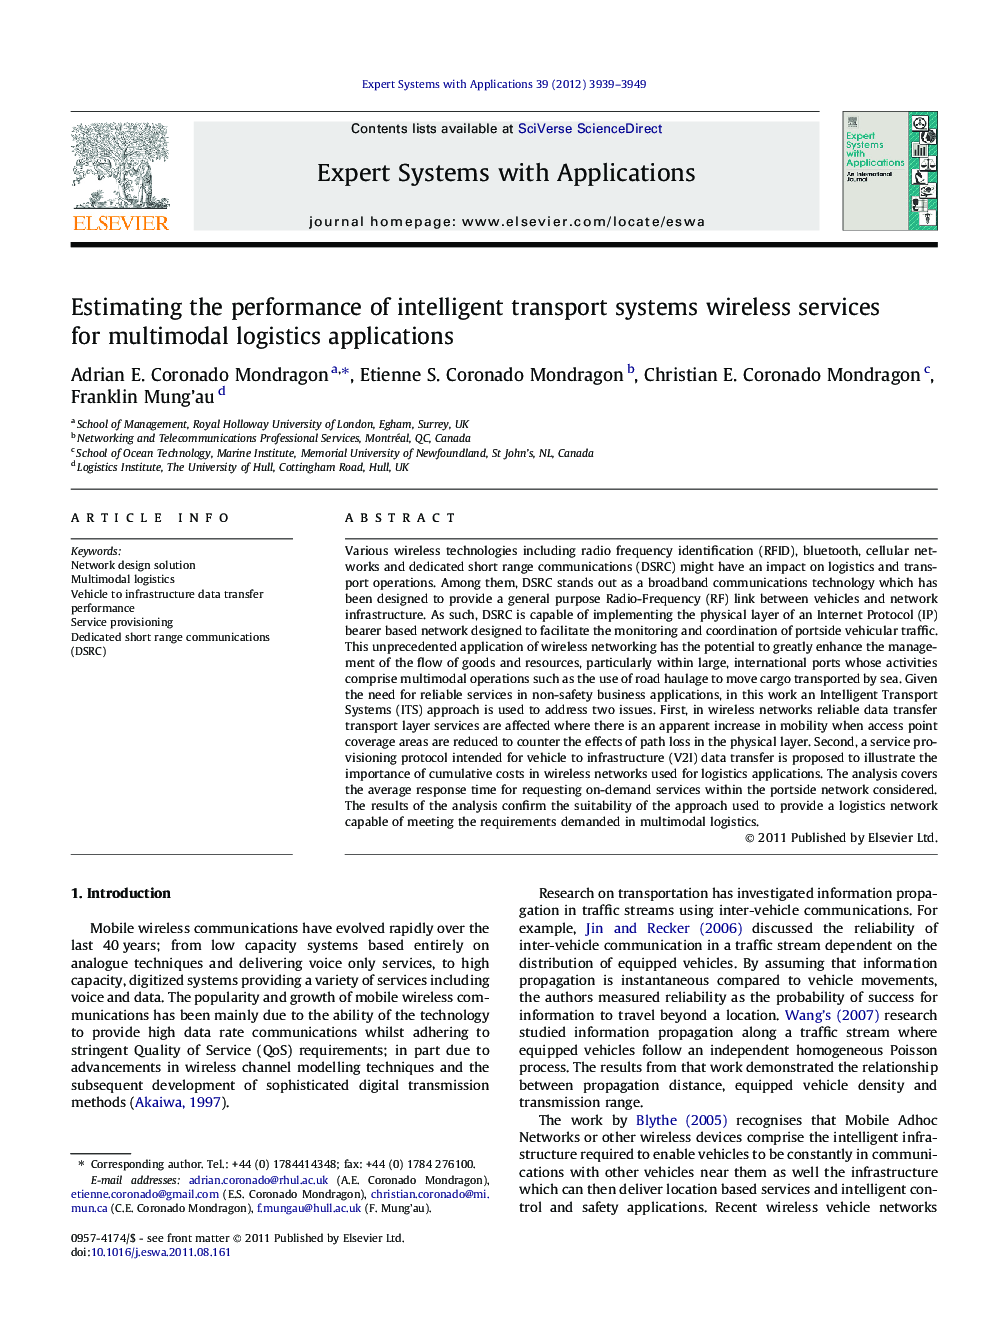 Estimating the performance of intelligent transport systems wireless services for multimodal logistics applications